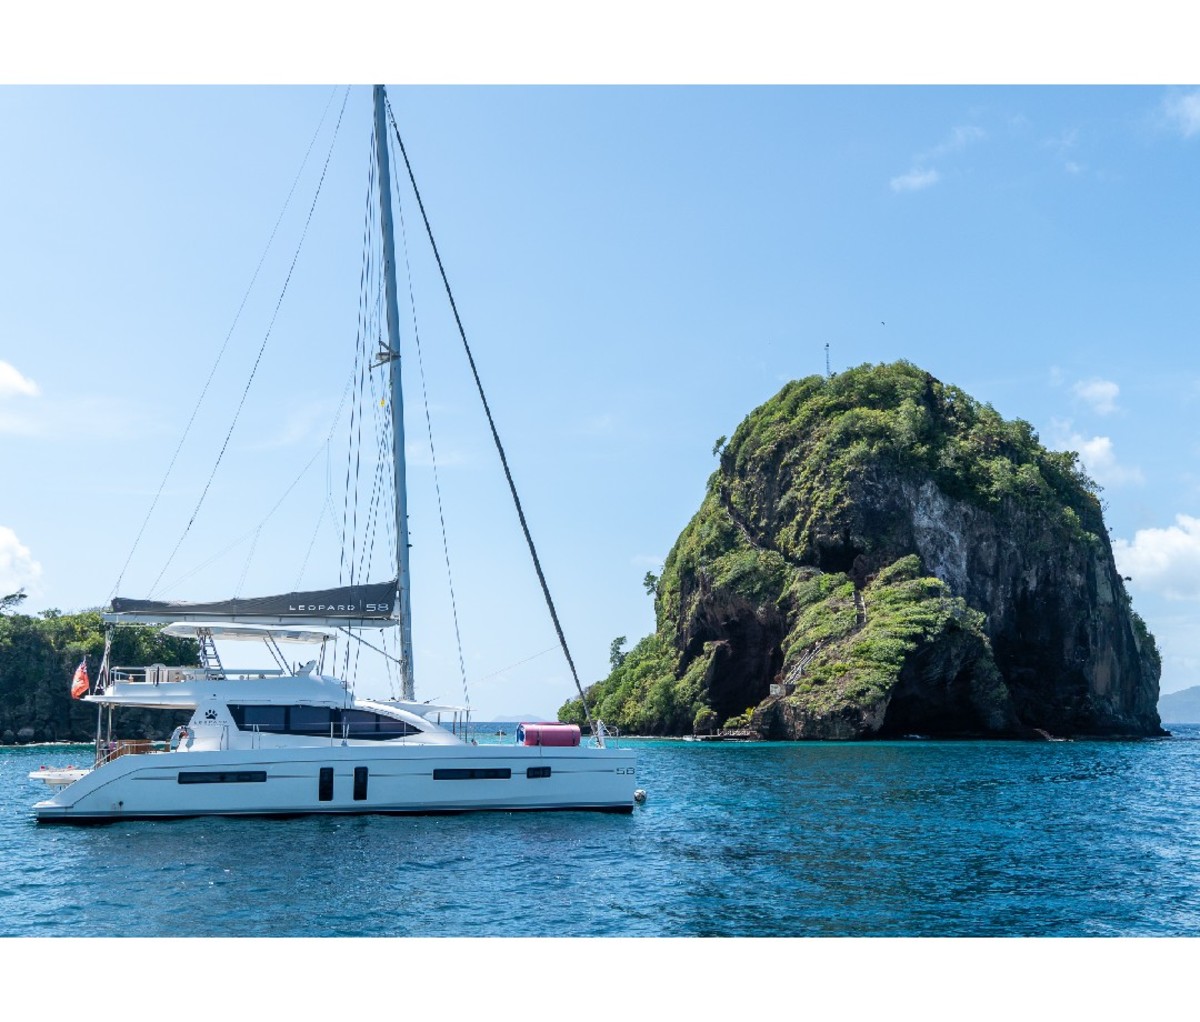 Sailing yacht parked by a tropical outcrop.